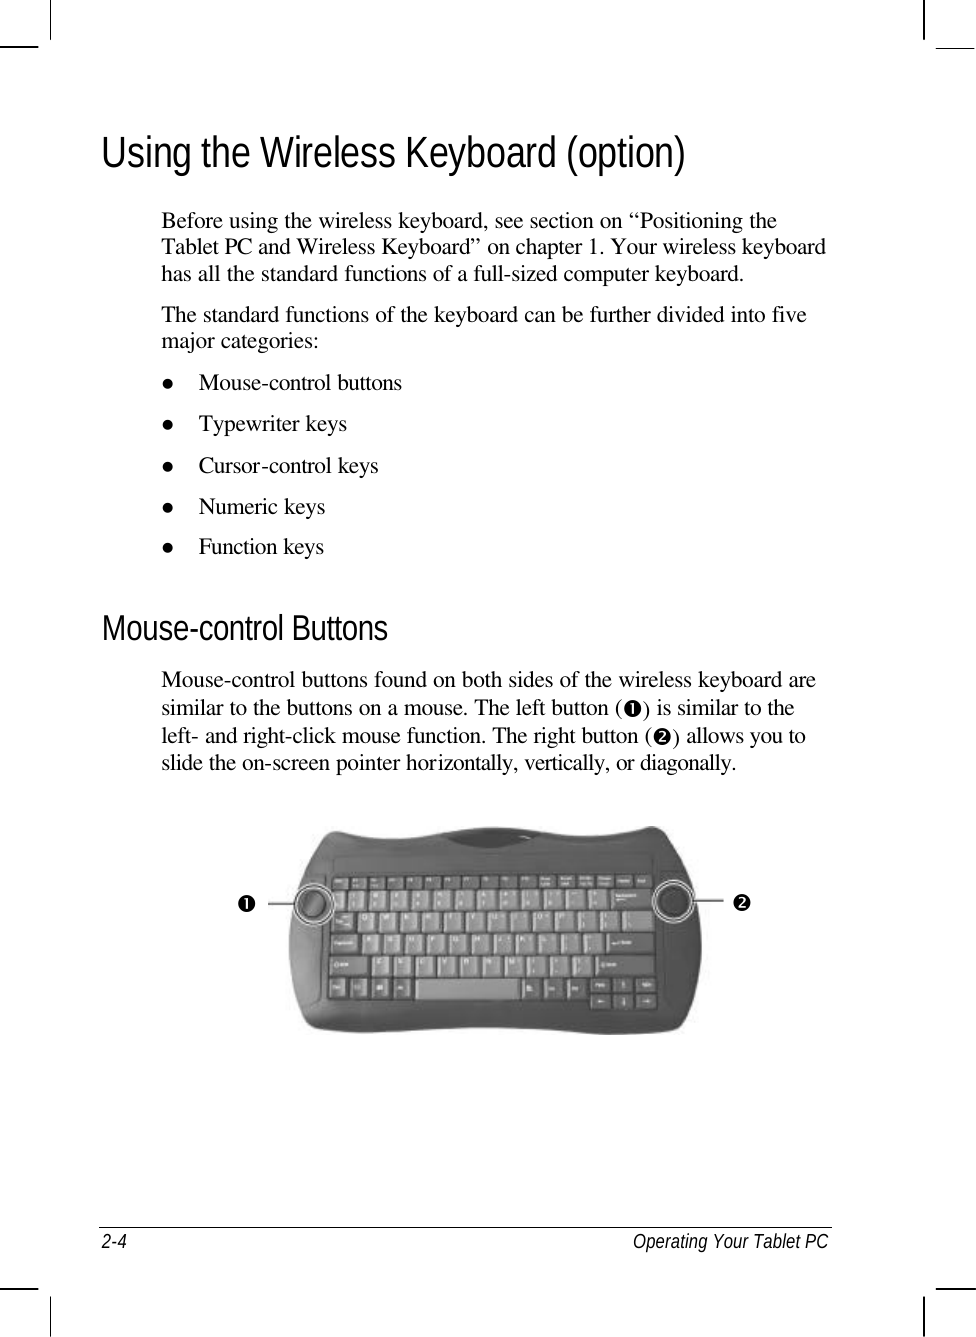  2-4 Operating Your Tablet PC Using the Wireless Keyboard (option) Before using the wireless keyboard, see section on “Positioning the Tablet PC and Wireless Keyboard” on chapter 1. Your wireless keyboard has all the standard functions of a full-sized computer keyboard. The standard functions of the keyboard can be further divided into five major categories: l Mouse-control buttons l Typewriter keys l Cursor-control keys l Numeric keys l Function keys Mouse-control Buttons Mouse-control buttons found on both sides of the wireless keyboard are similar to the buttons on a mouse. The left button (Œ) is similar to the left- and right-click mouse function. The right button (•) allows you to slide the on-screen pointer horizontally, vertically, or diagonally.    Œ • 